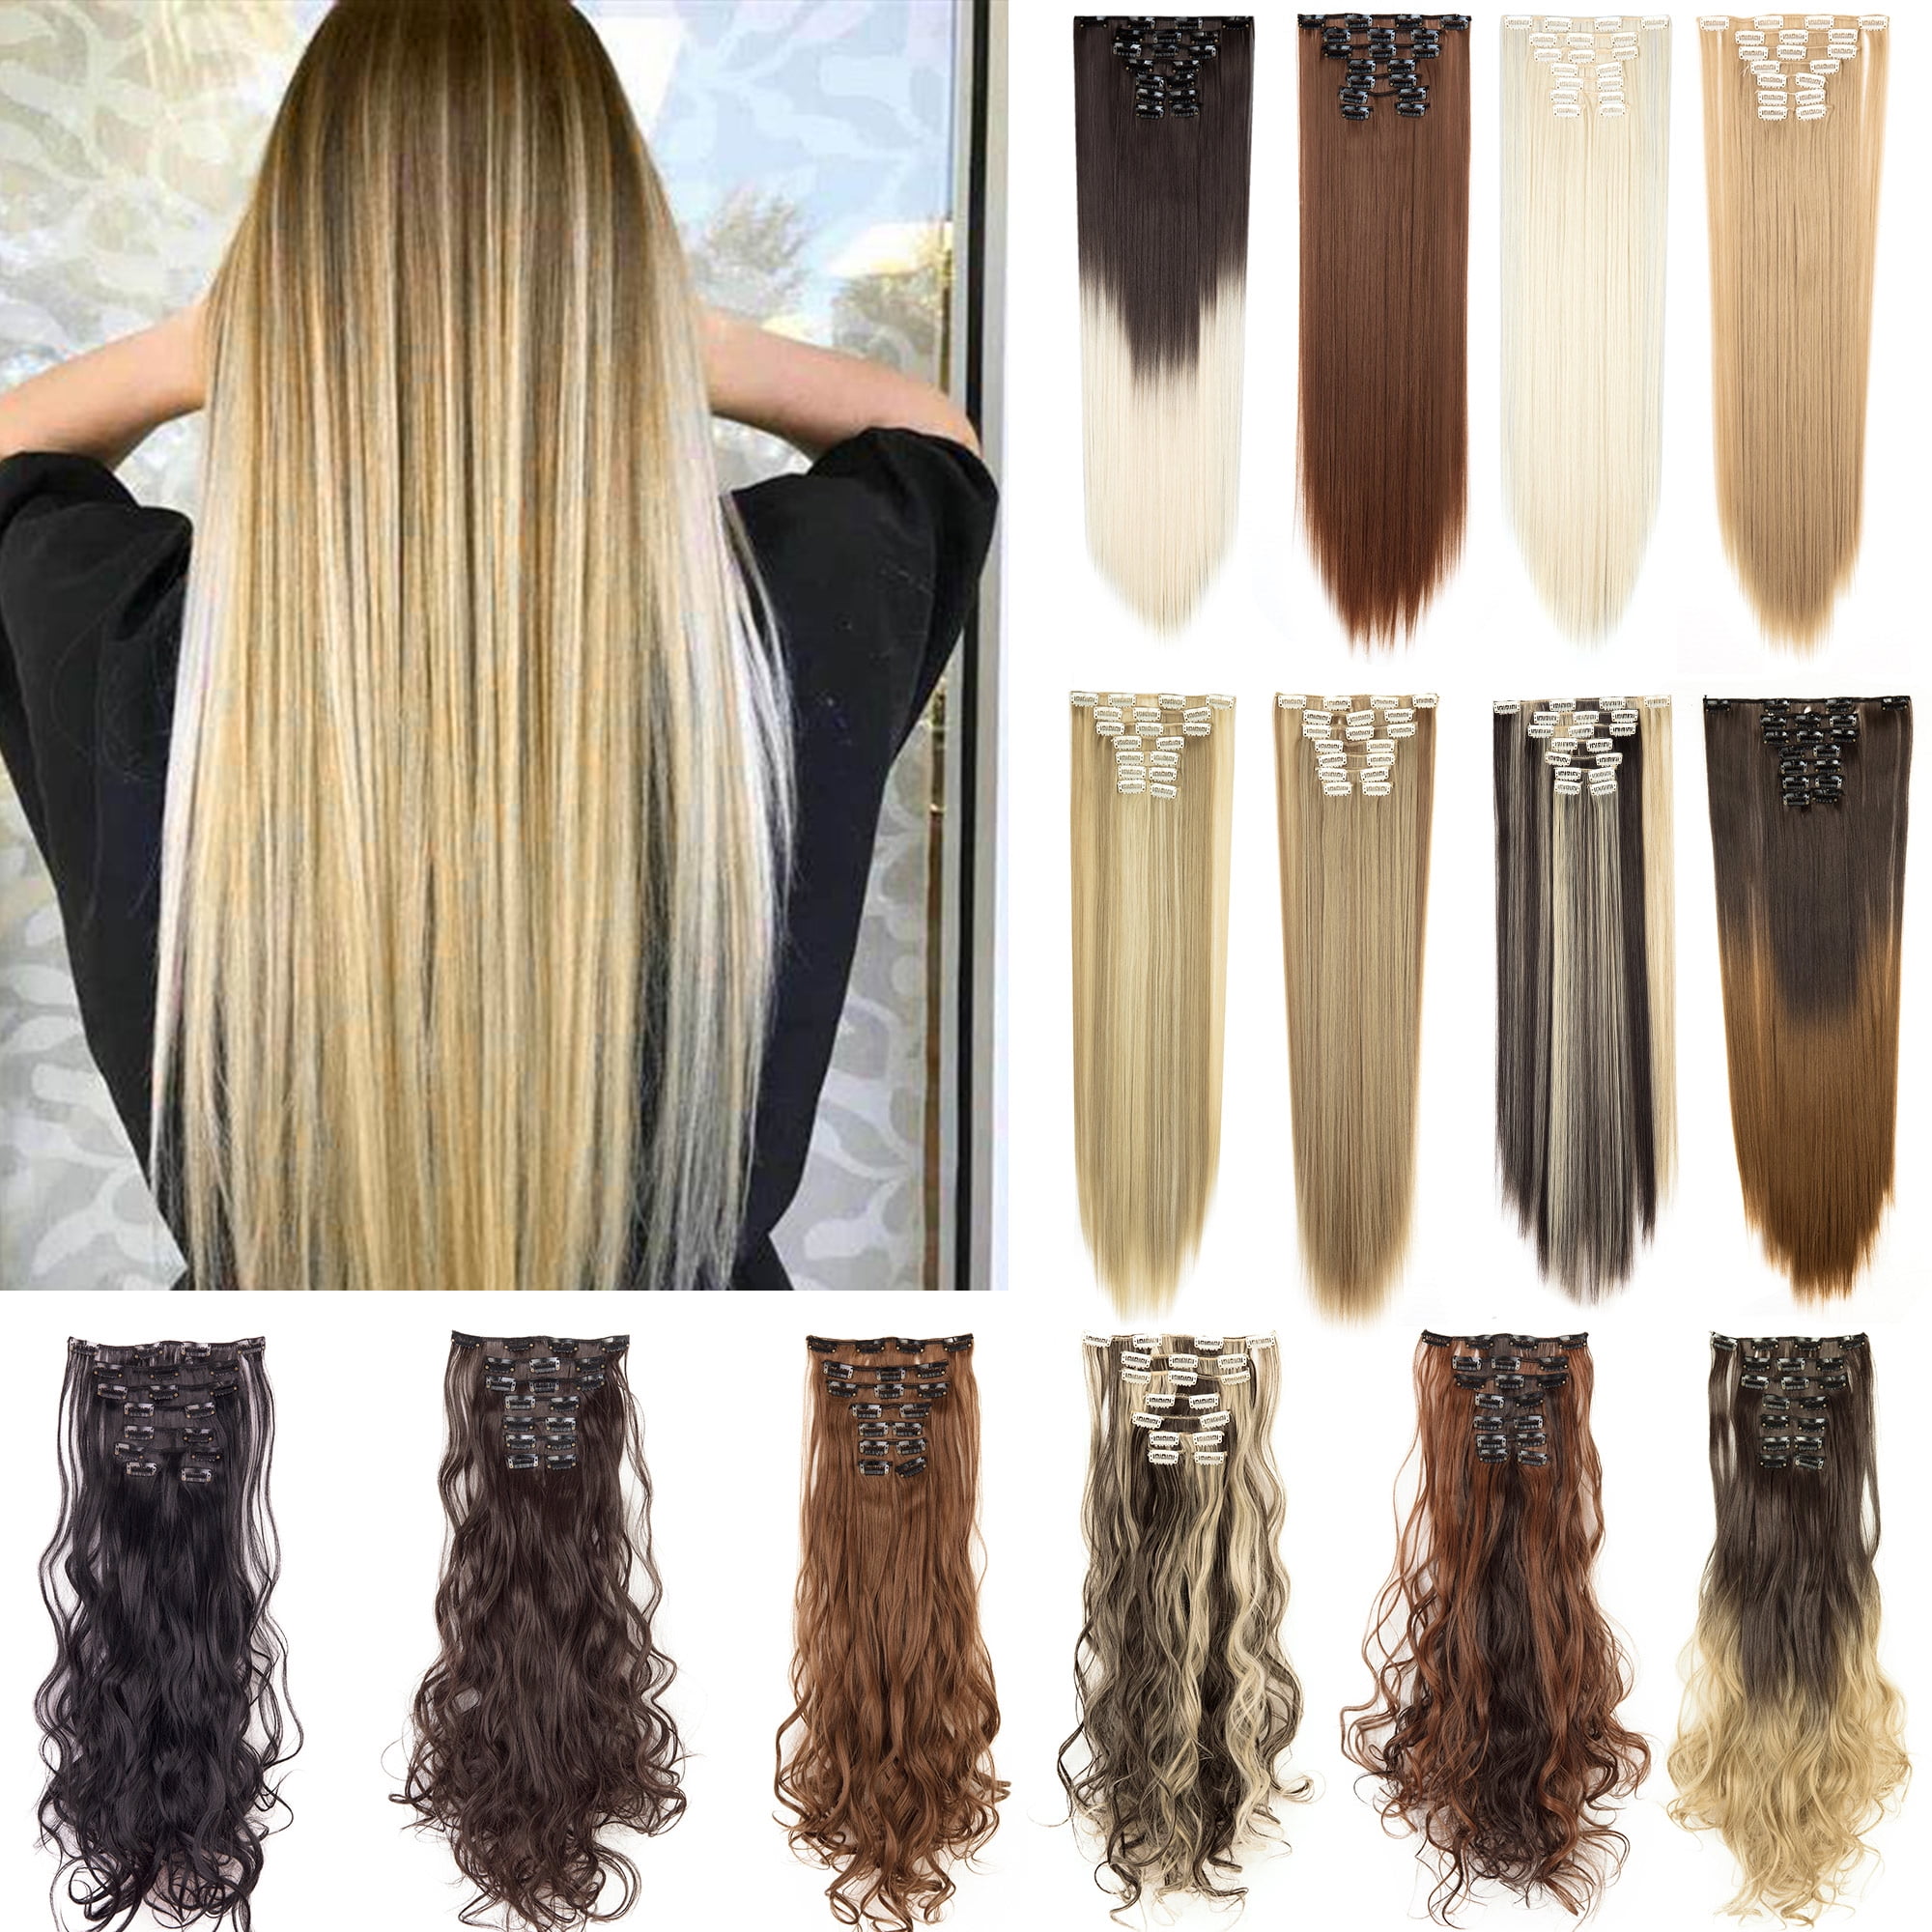 40 Strands Feather Hair Extensions 10 Colors 16 Inch 40 Strands Hair  Feathers Mixed Colors Colored Synthetic Hair Feathers Extensions Kit